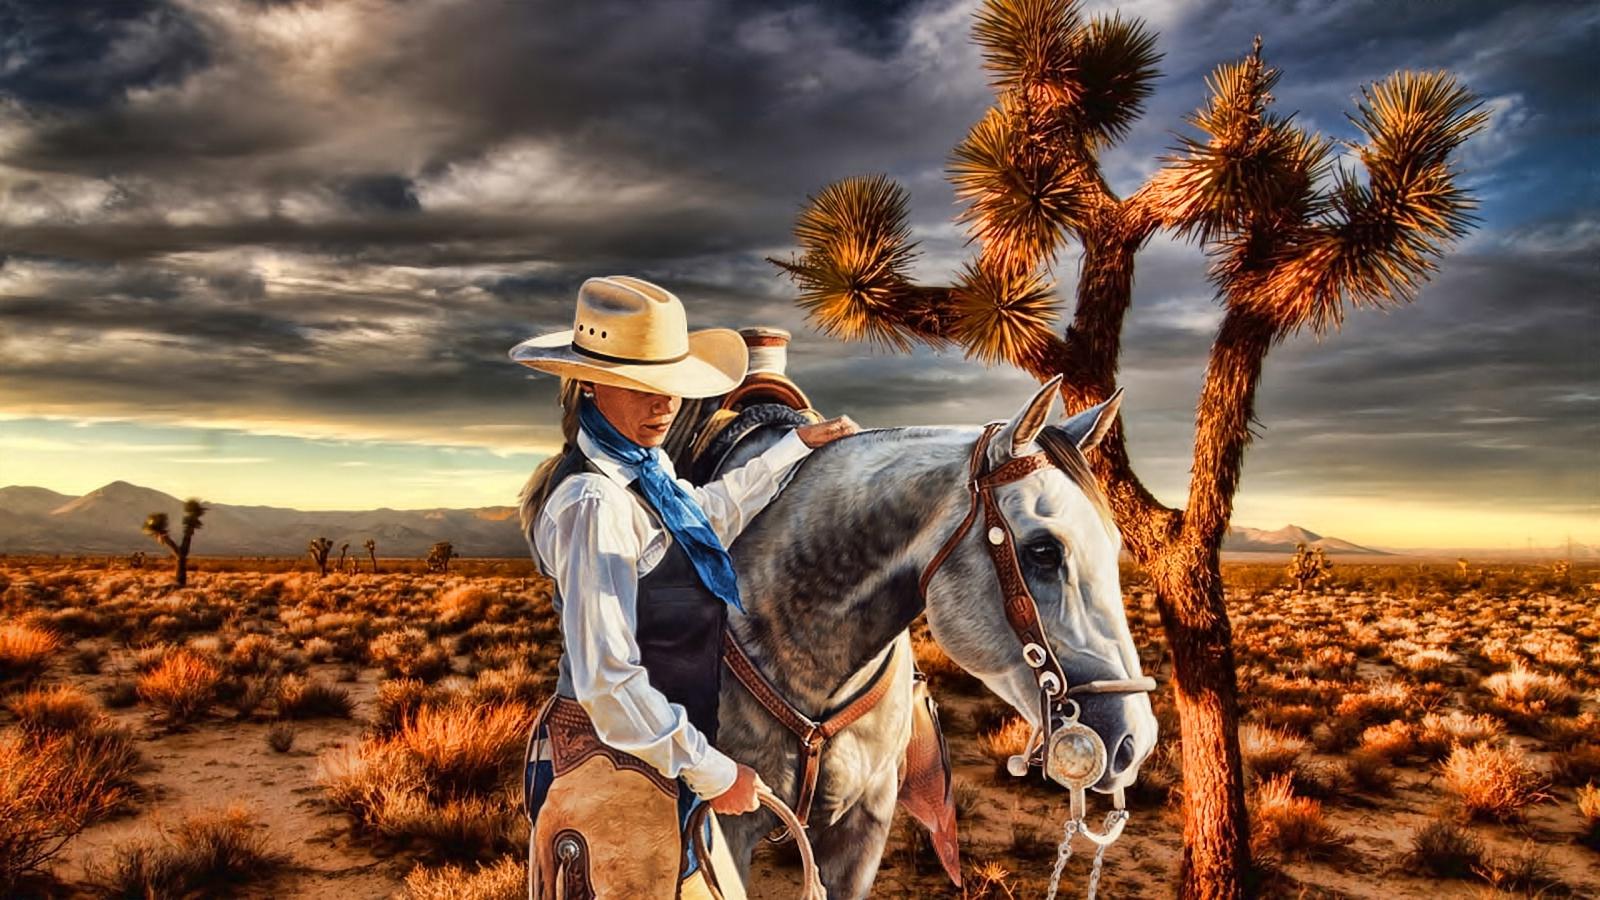 Cowgirl - (#163656) - High Quality and Resolution Wallpapers on ...